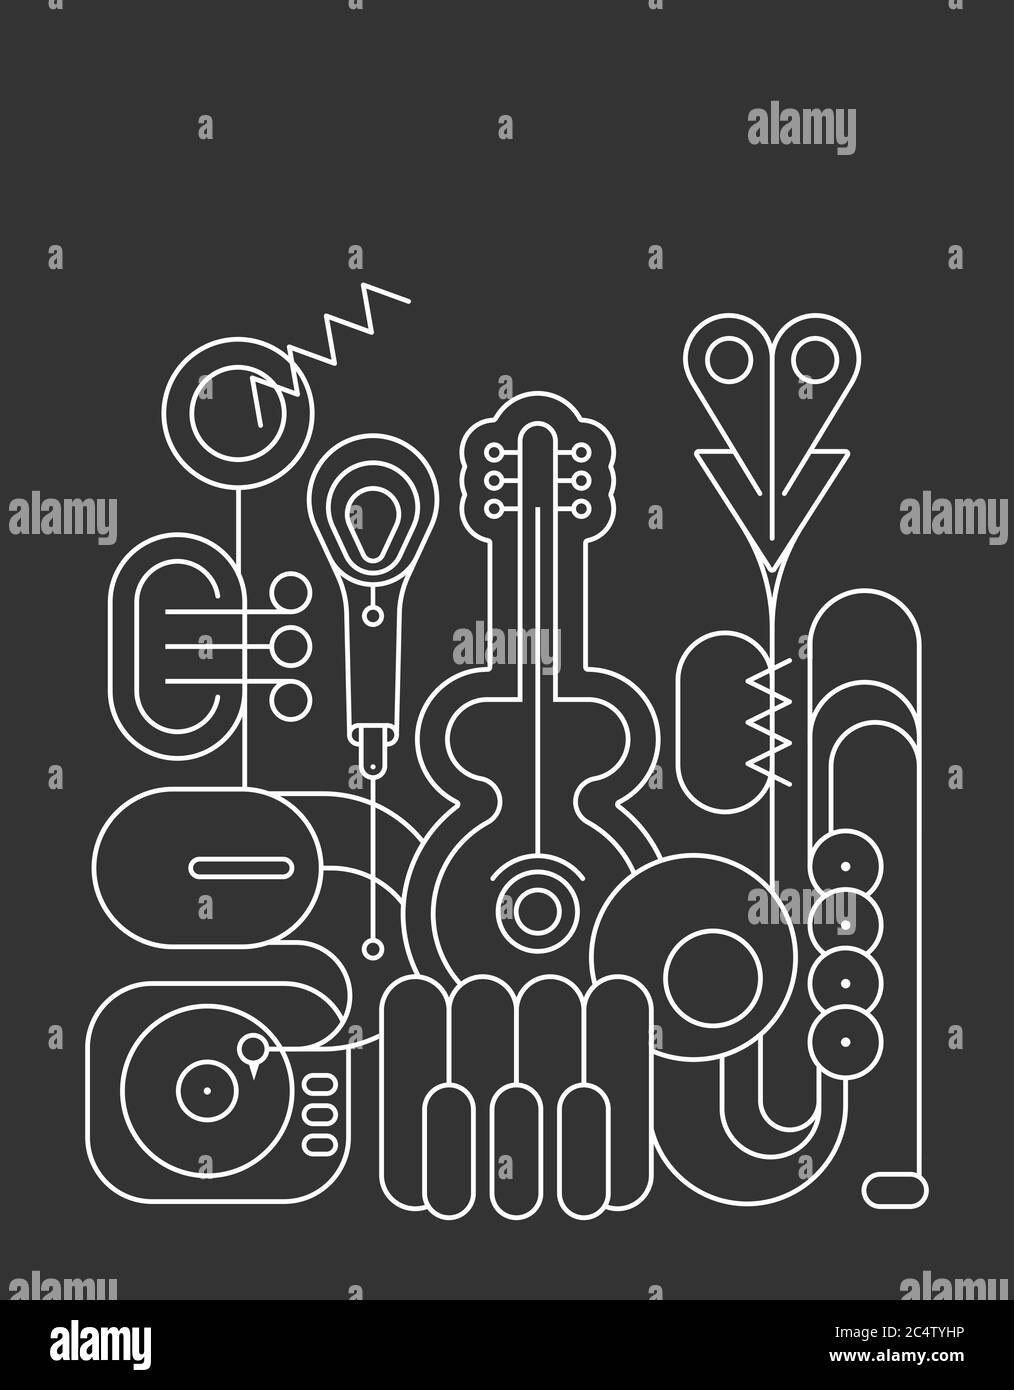 White line art silhouettes isolated on a dark grey background Music Instruments Design vector illustration. Guitar, saxophone, piano keyboard, trumpet Stock Vector